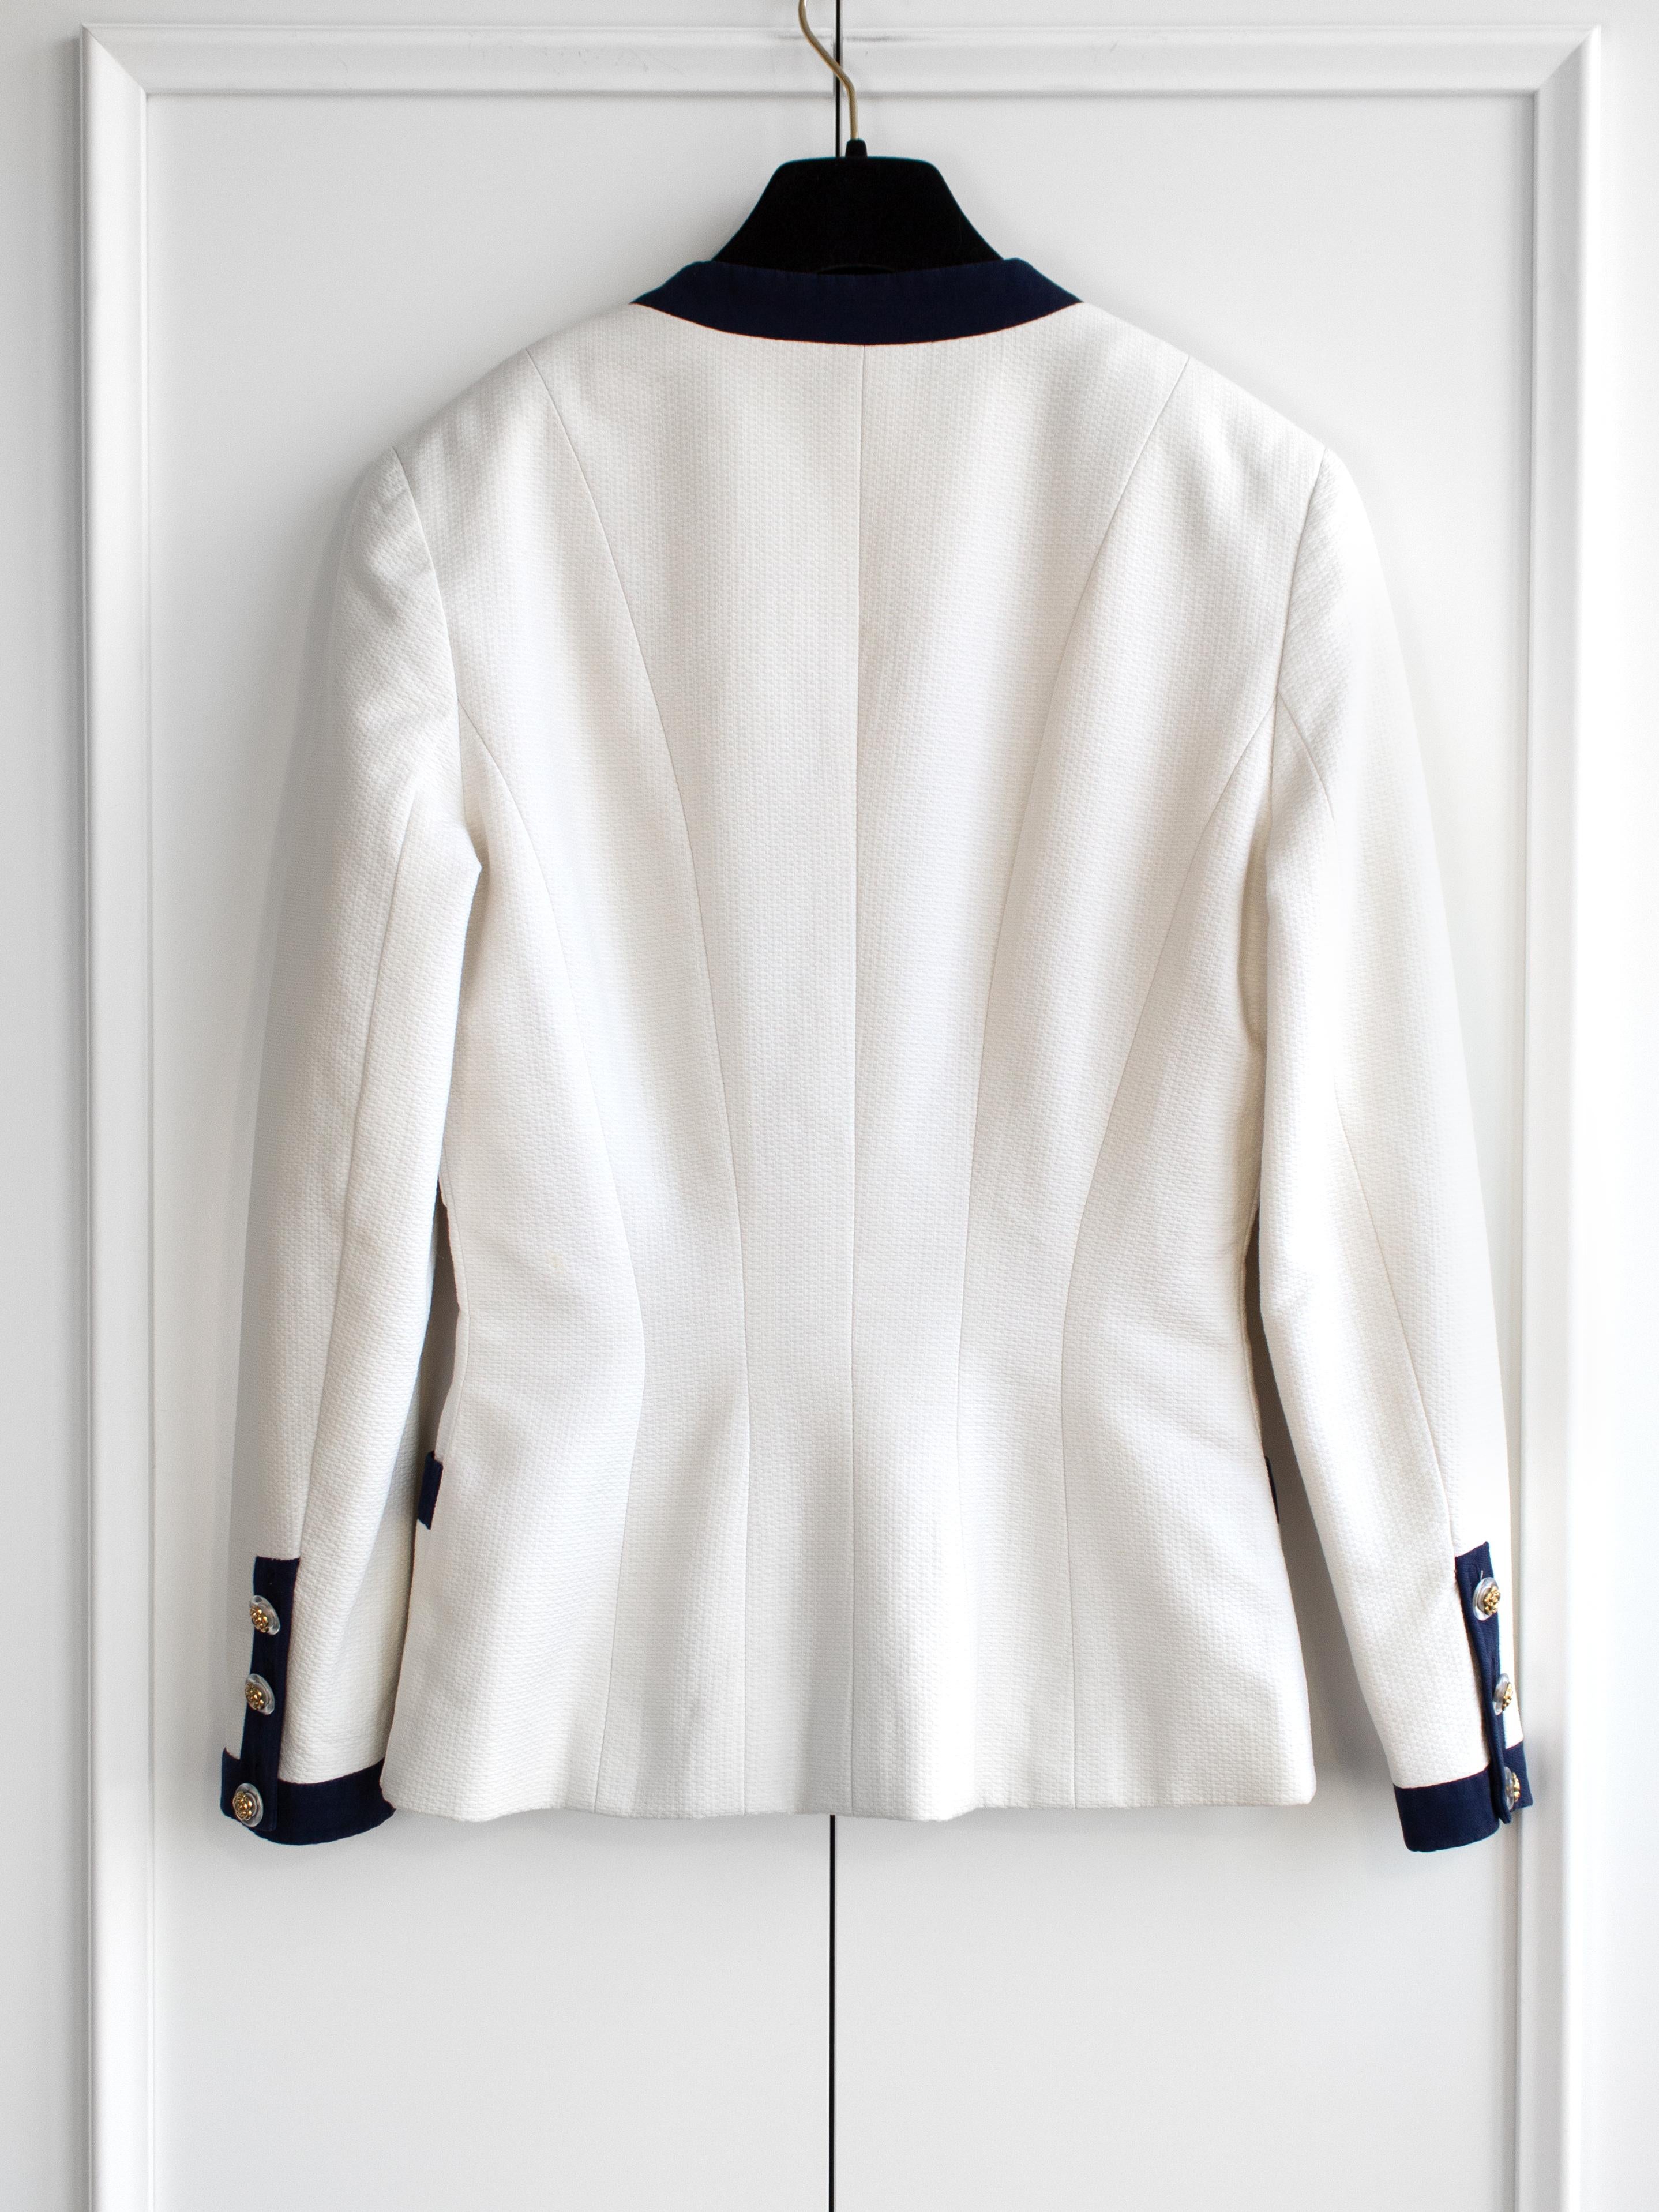 Chanel Vintage S/S 1992 Runway White Navy Lucite Gold Camellia Cotton Jacket 2